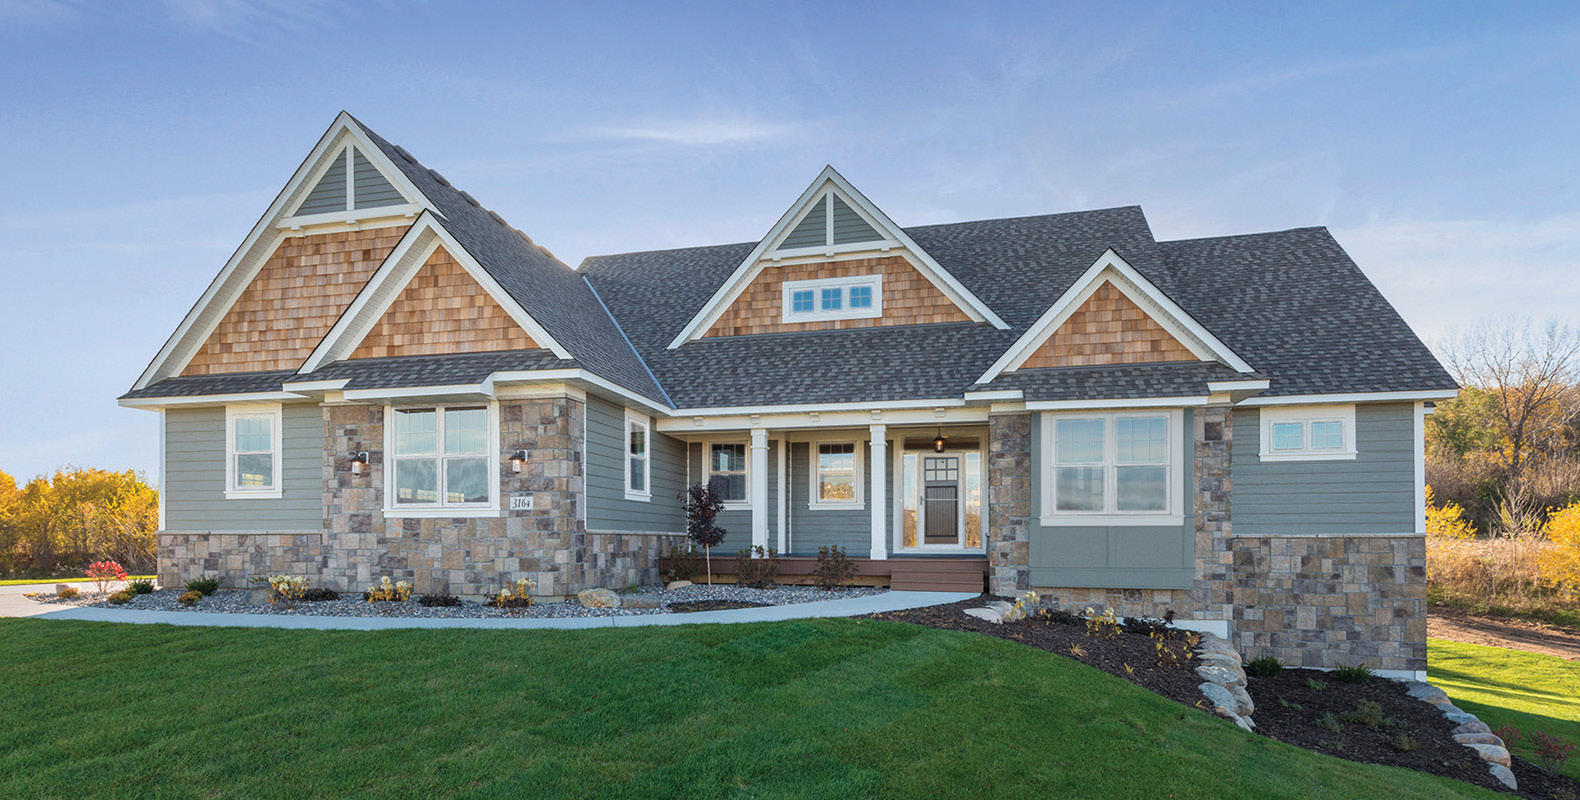 Exterior Renovations, LLC is an Andersen Windows Certified Contractor in Middleton, WI